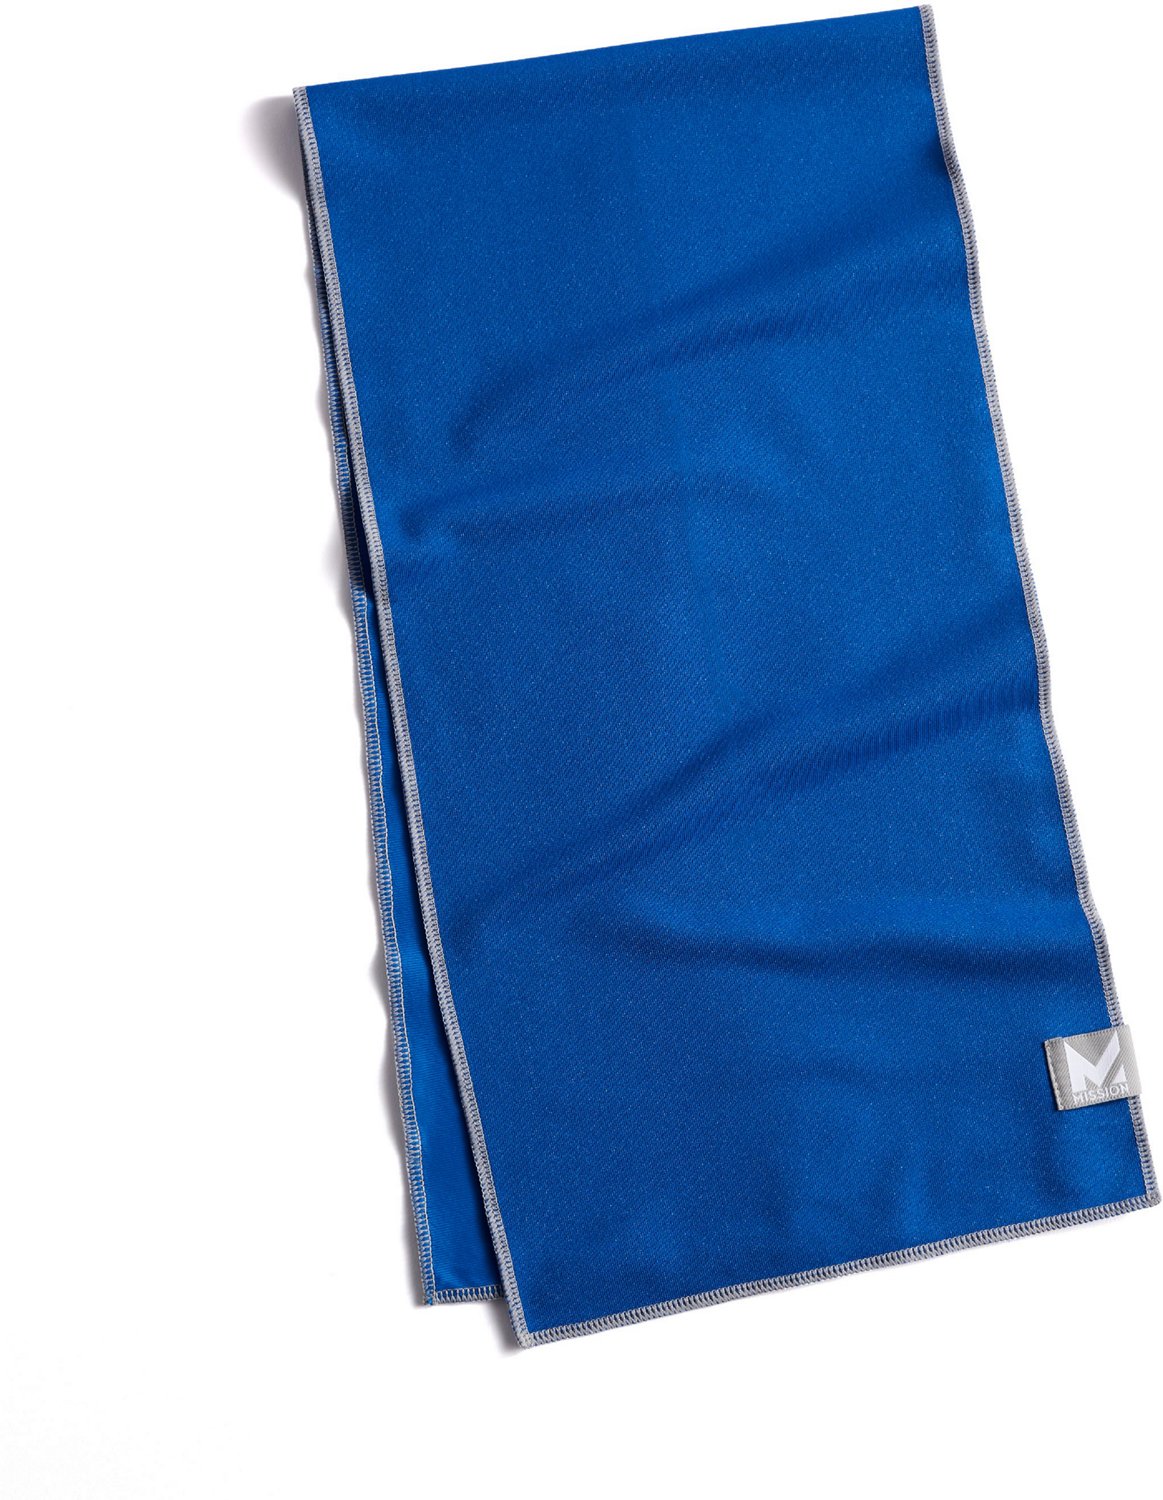 MISSION DuoMax Cooling Towel | Academy